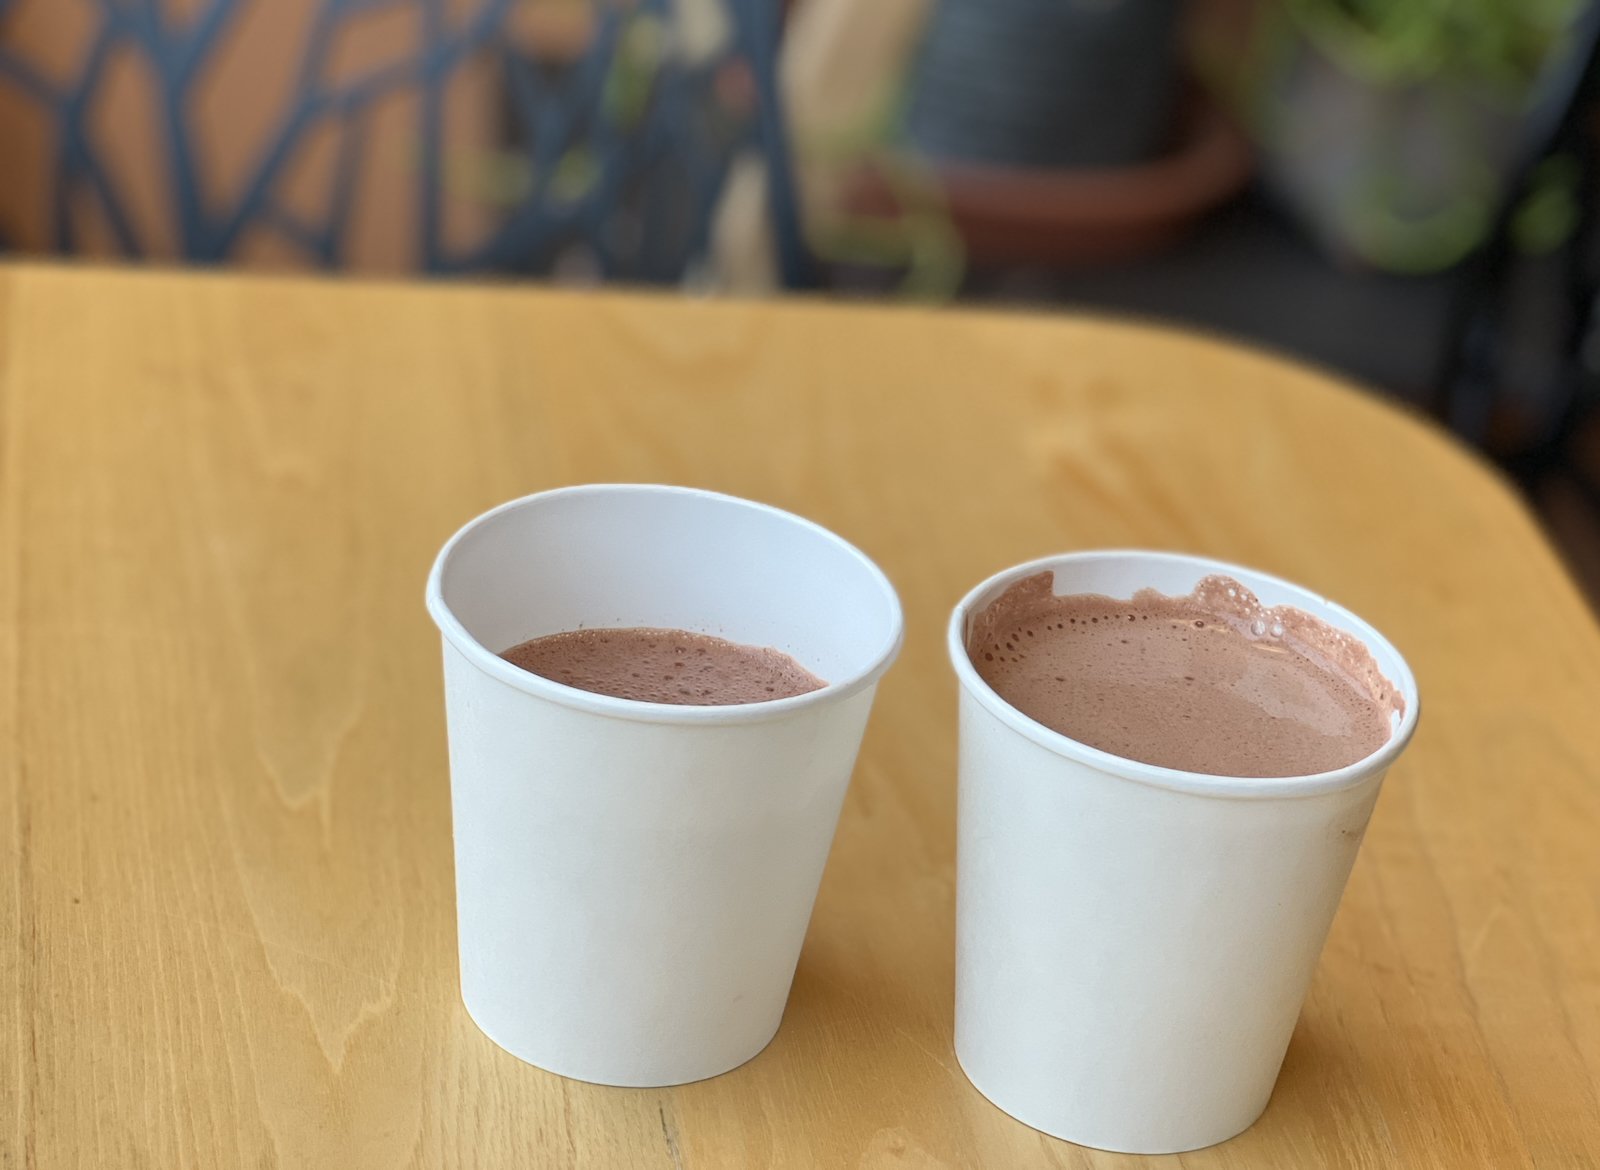 Tabal hot chocolate and sipping chocolate